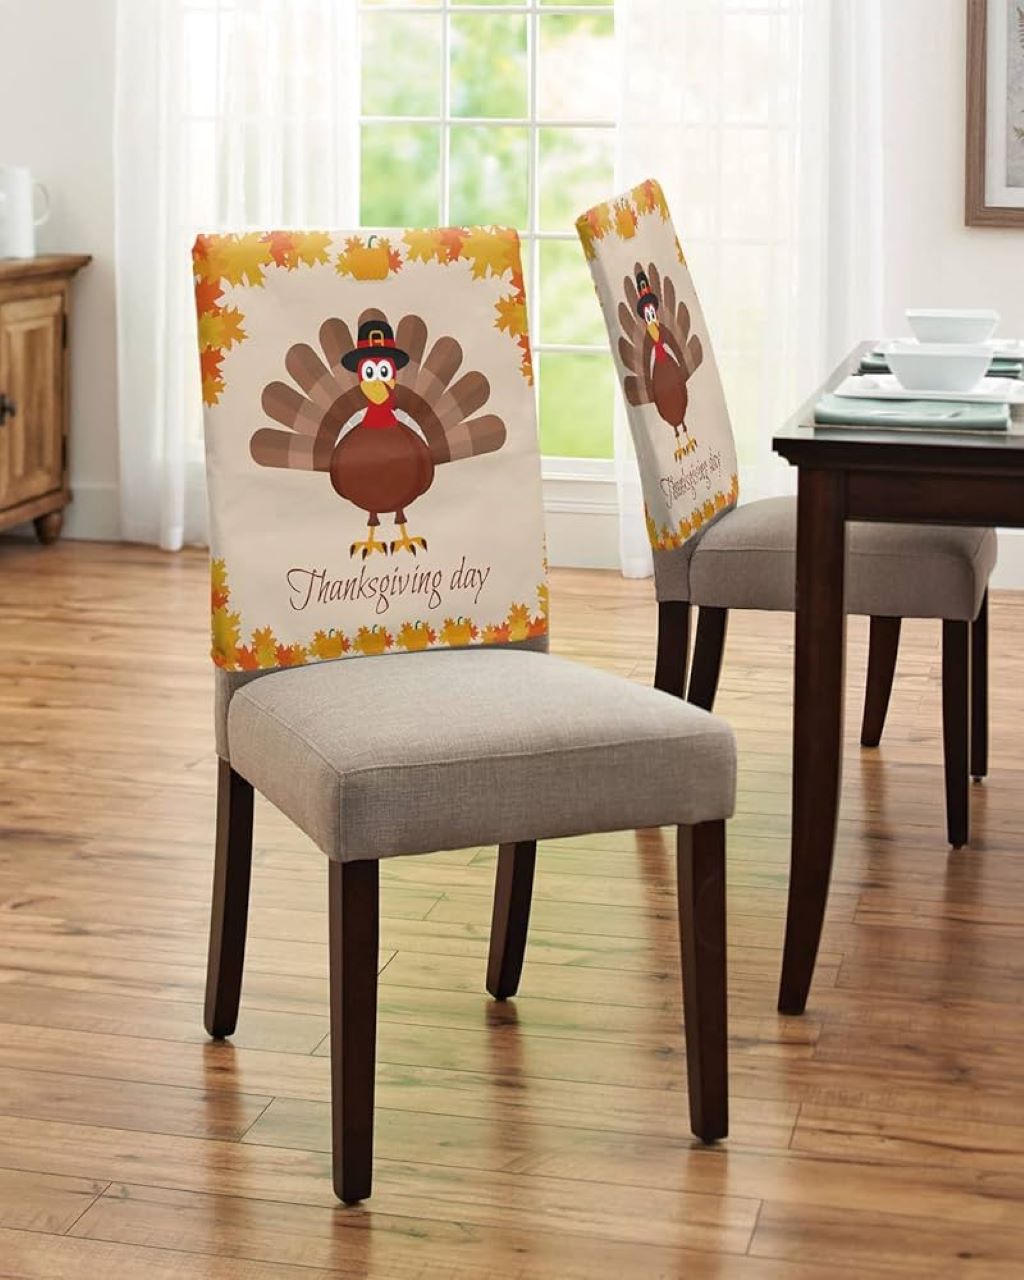 Protect Your Furniture with Thanksgiving Chair Covers